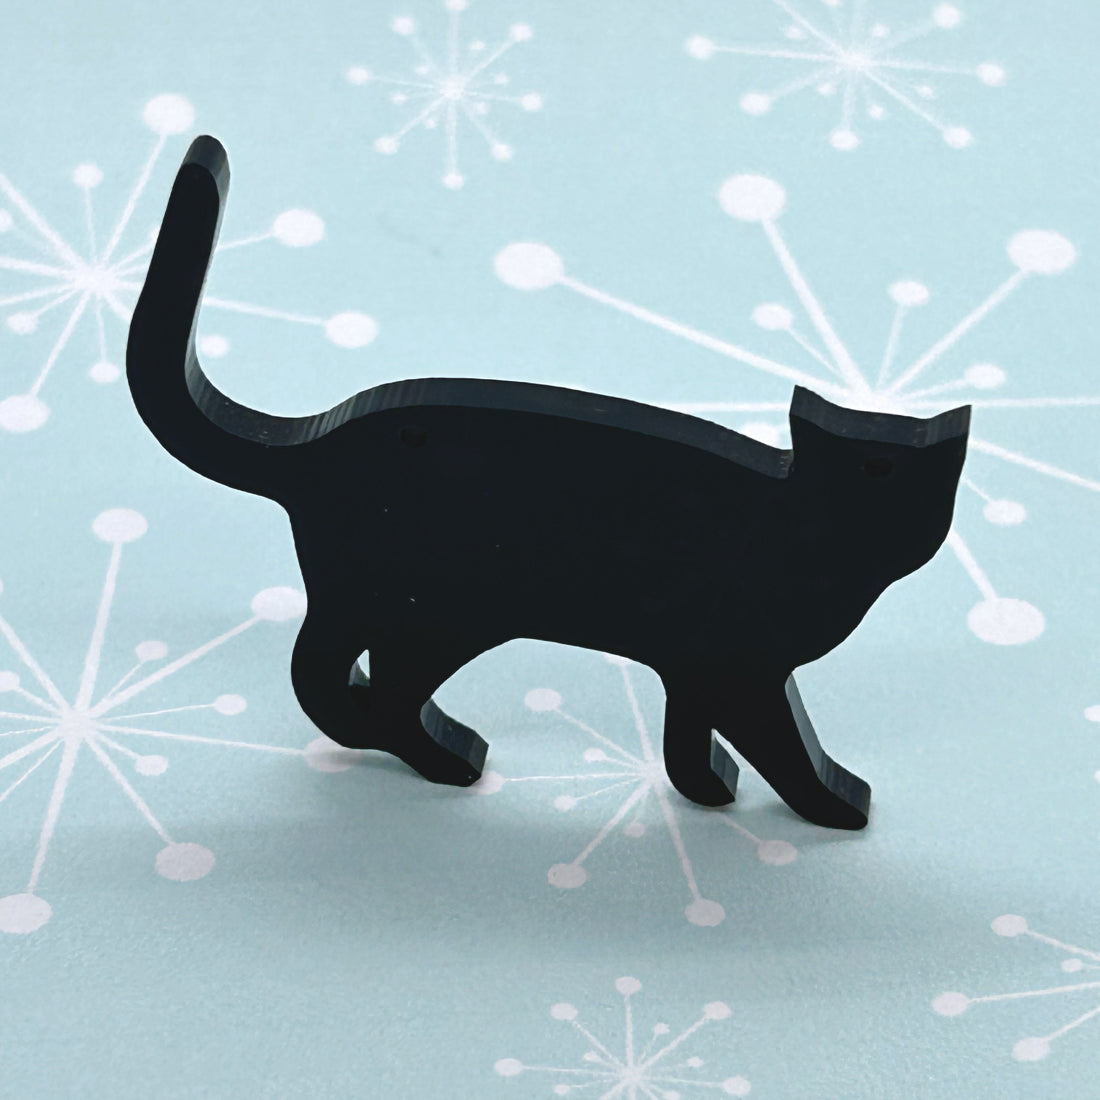 Acrylic cat necklaces and brooches - The Argentum Design Co